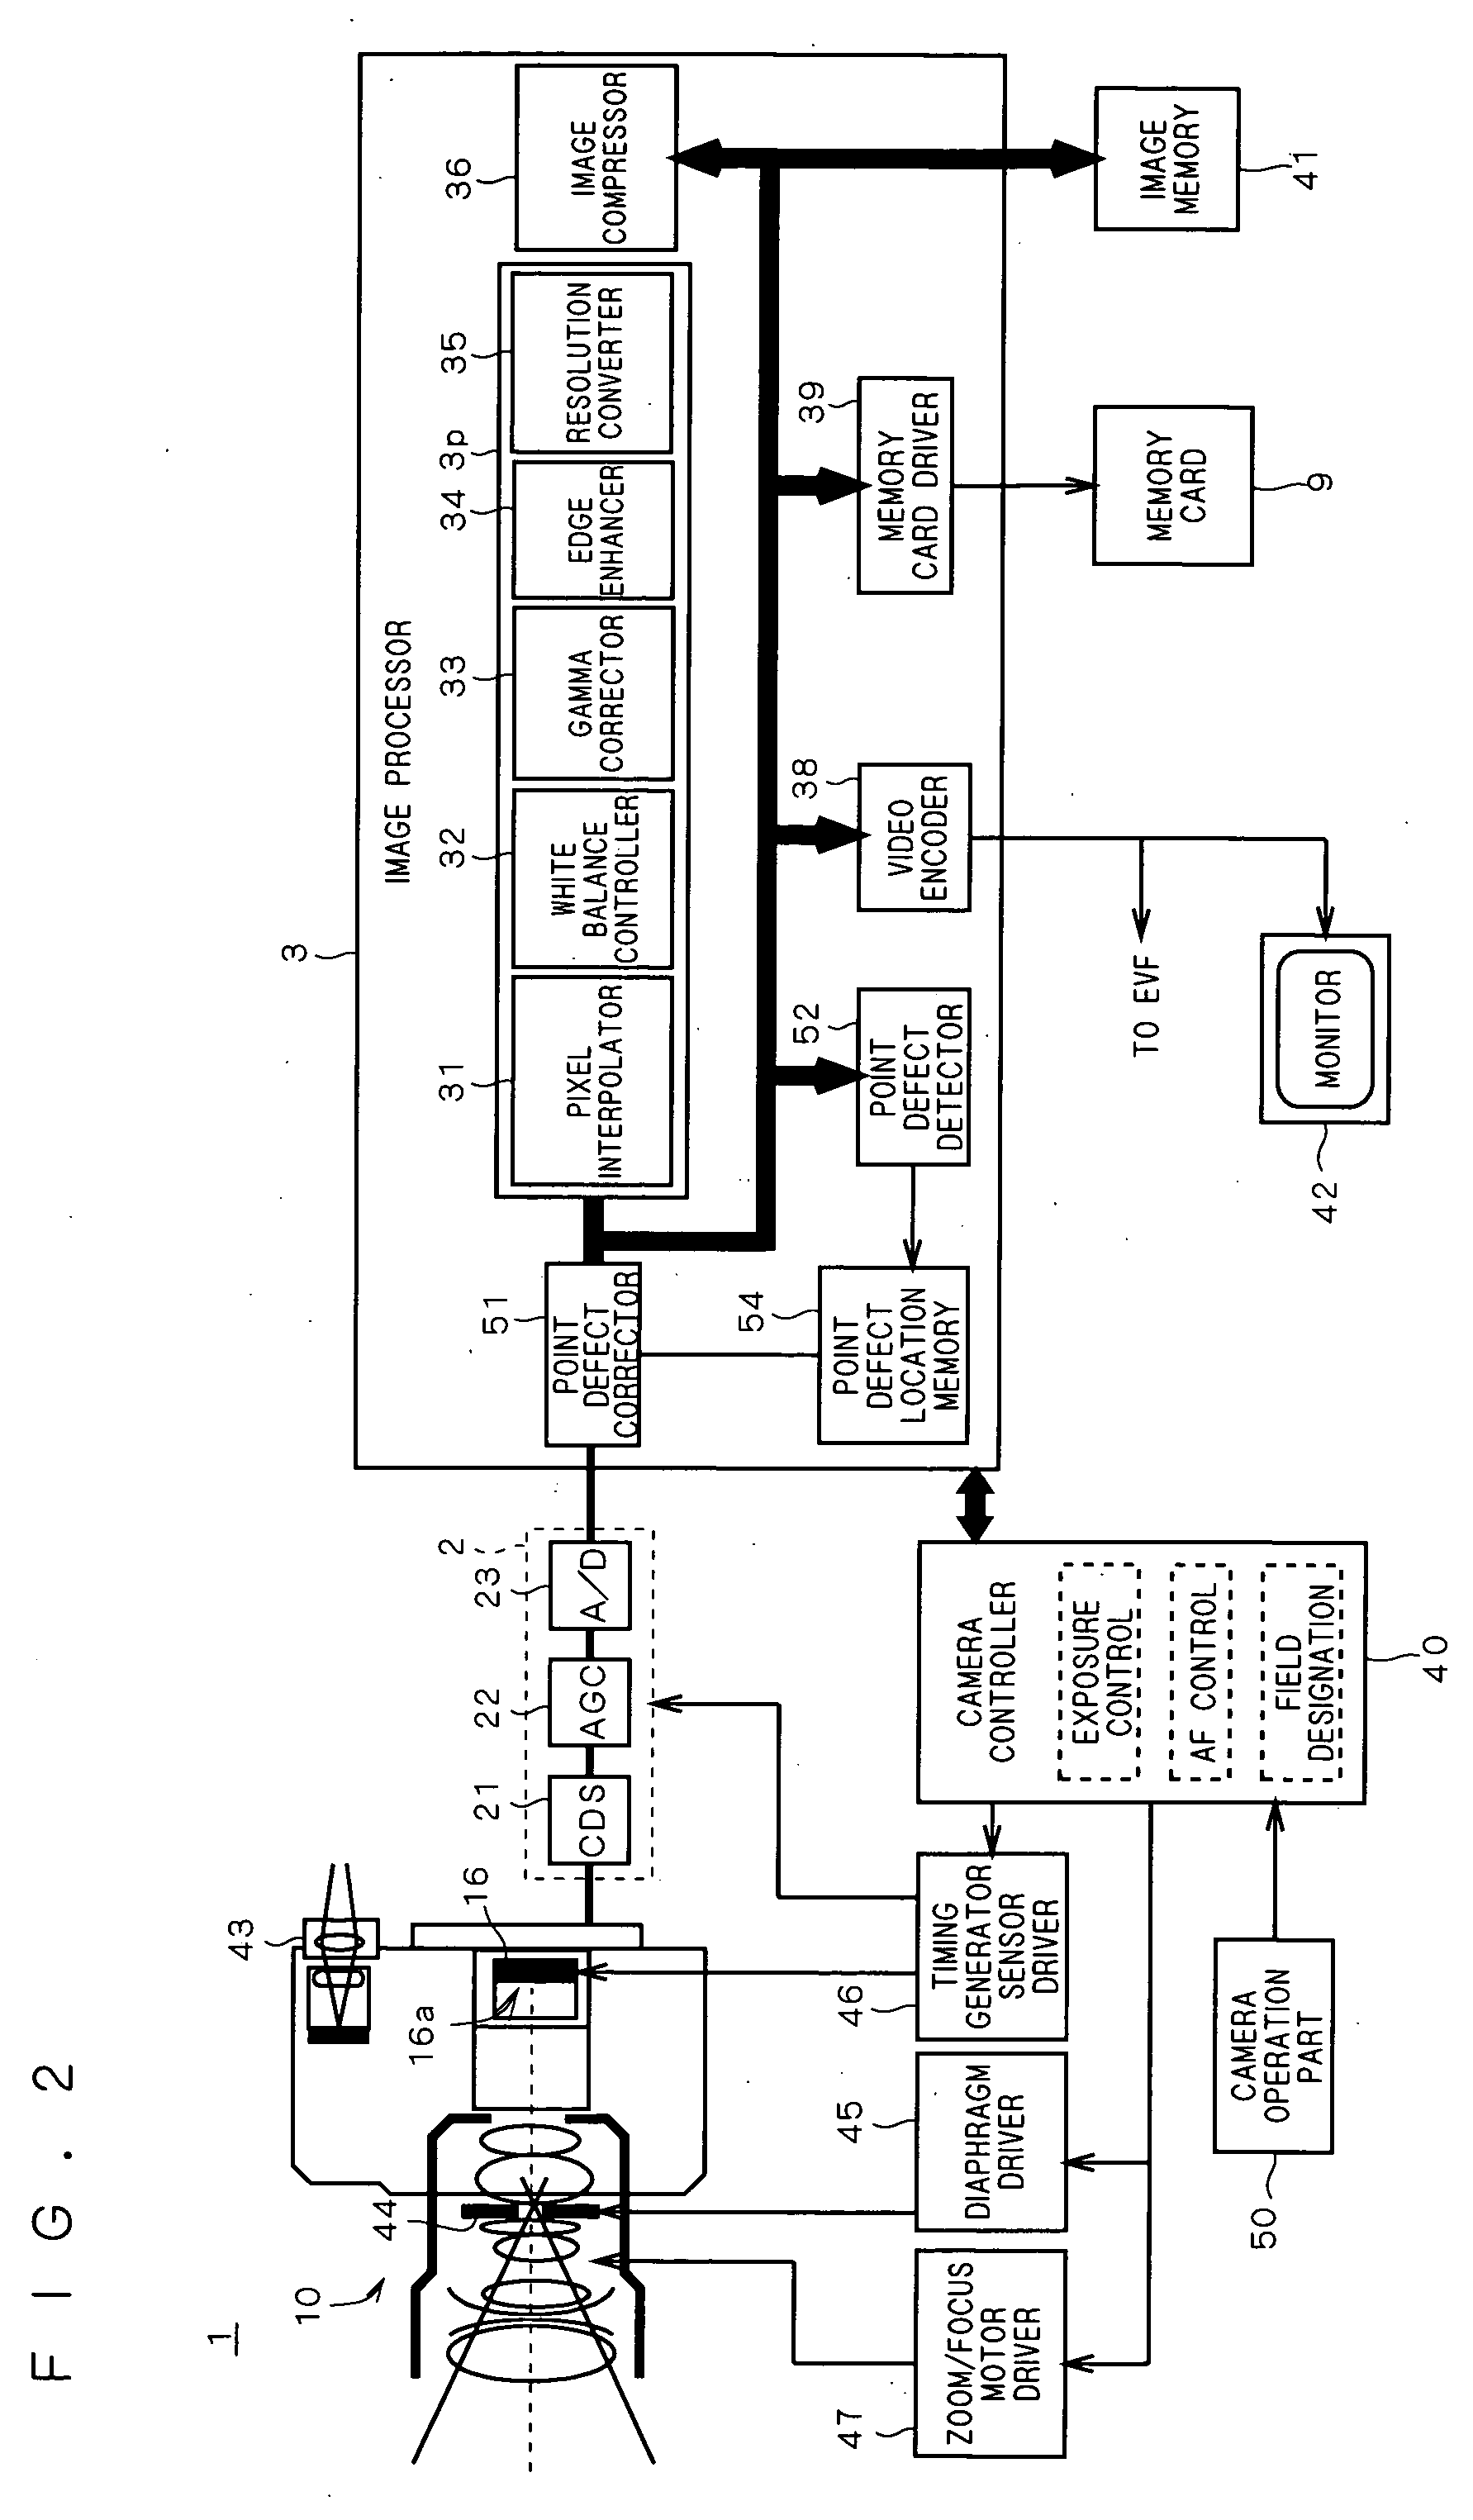 Image capturing apparatus and computer software product